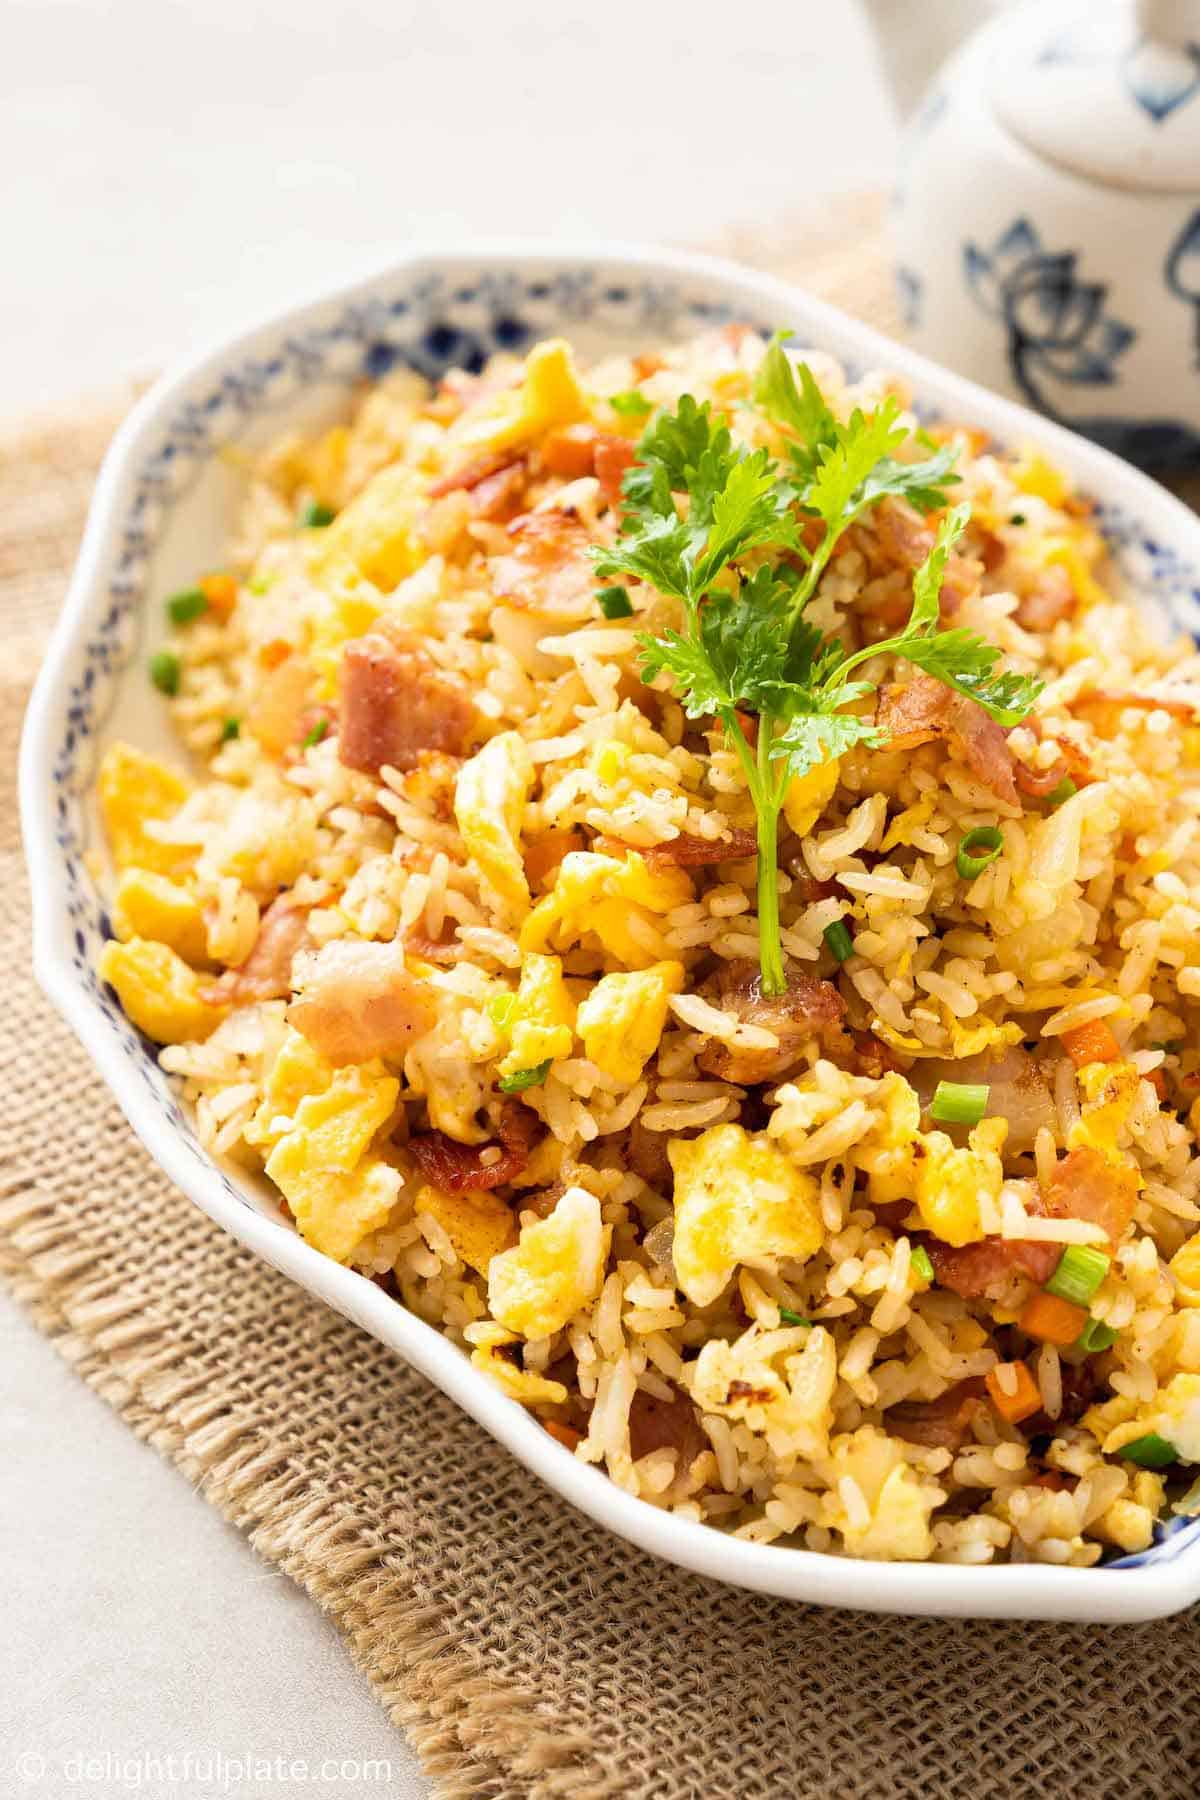 A platter of yellow fried rice with bacon